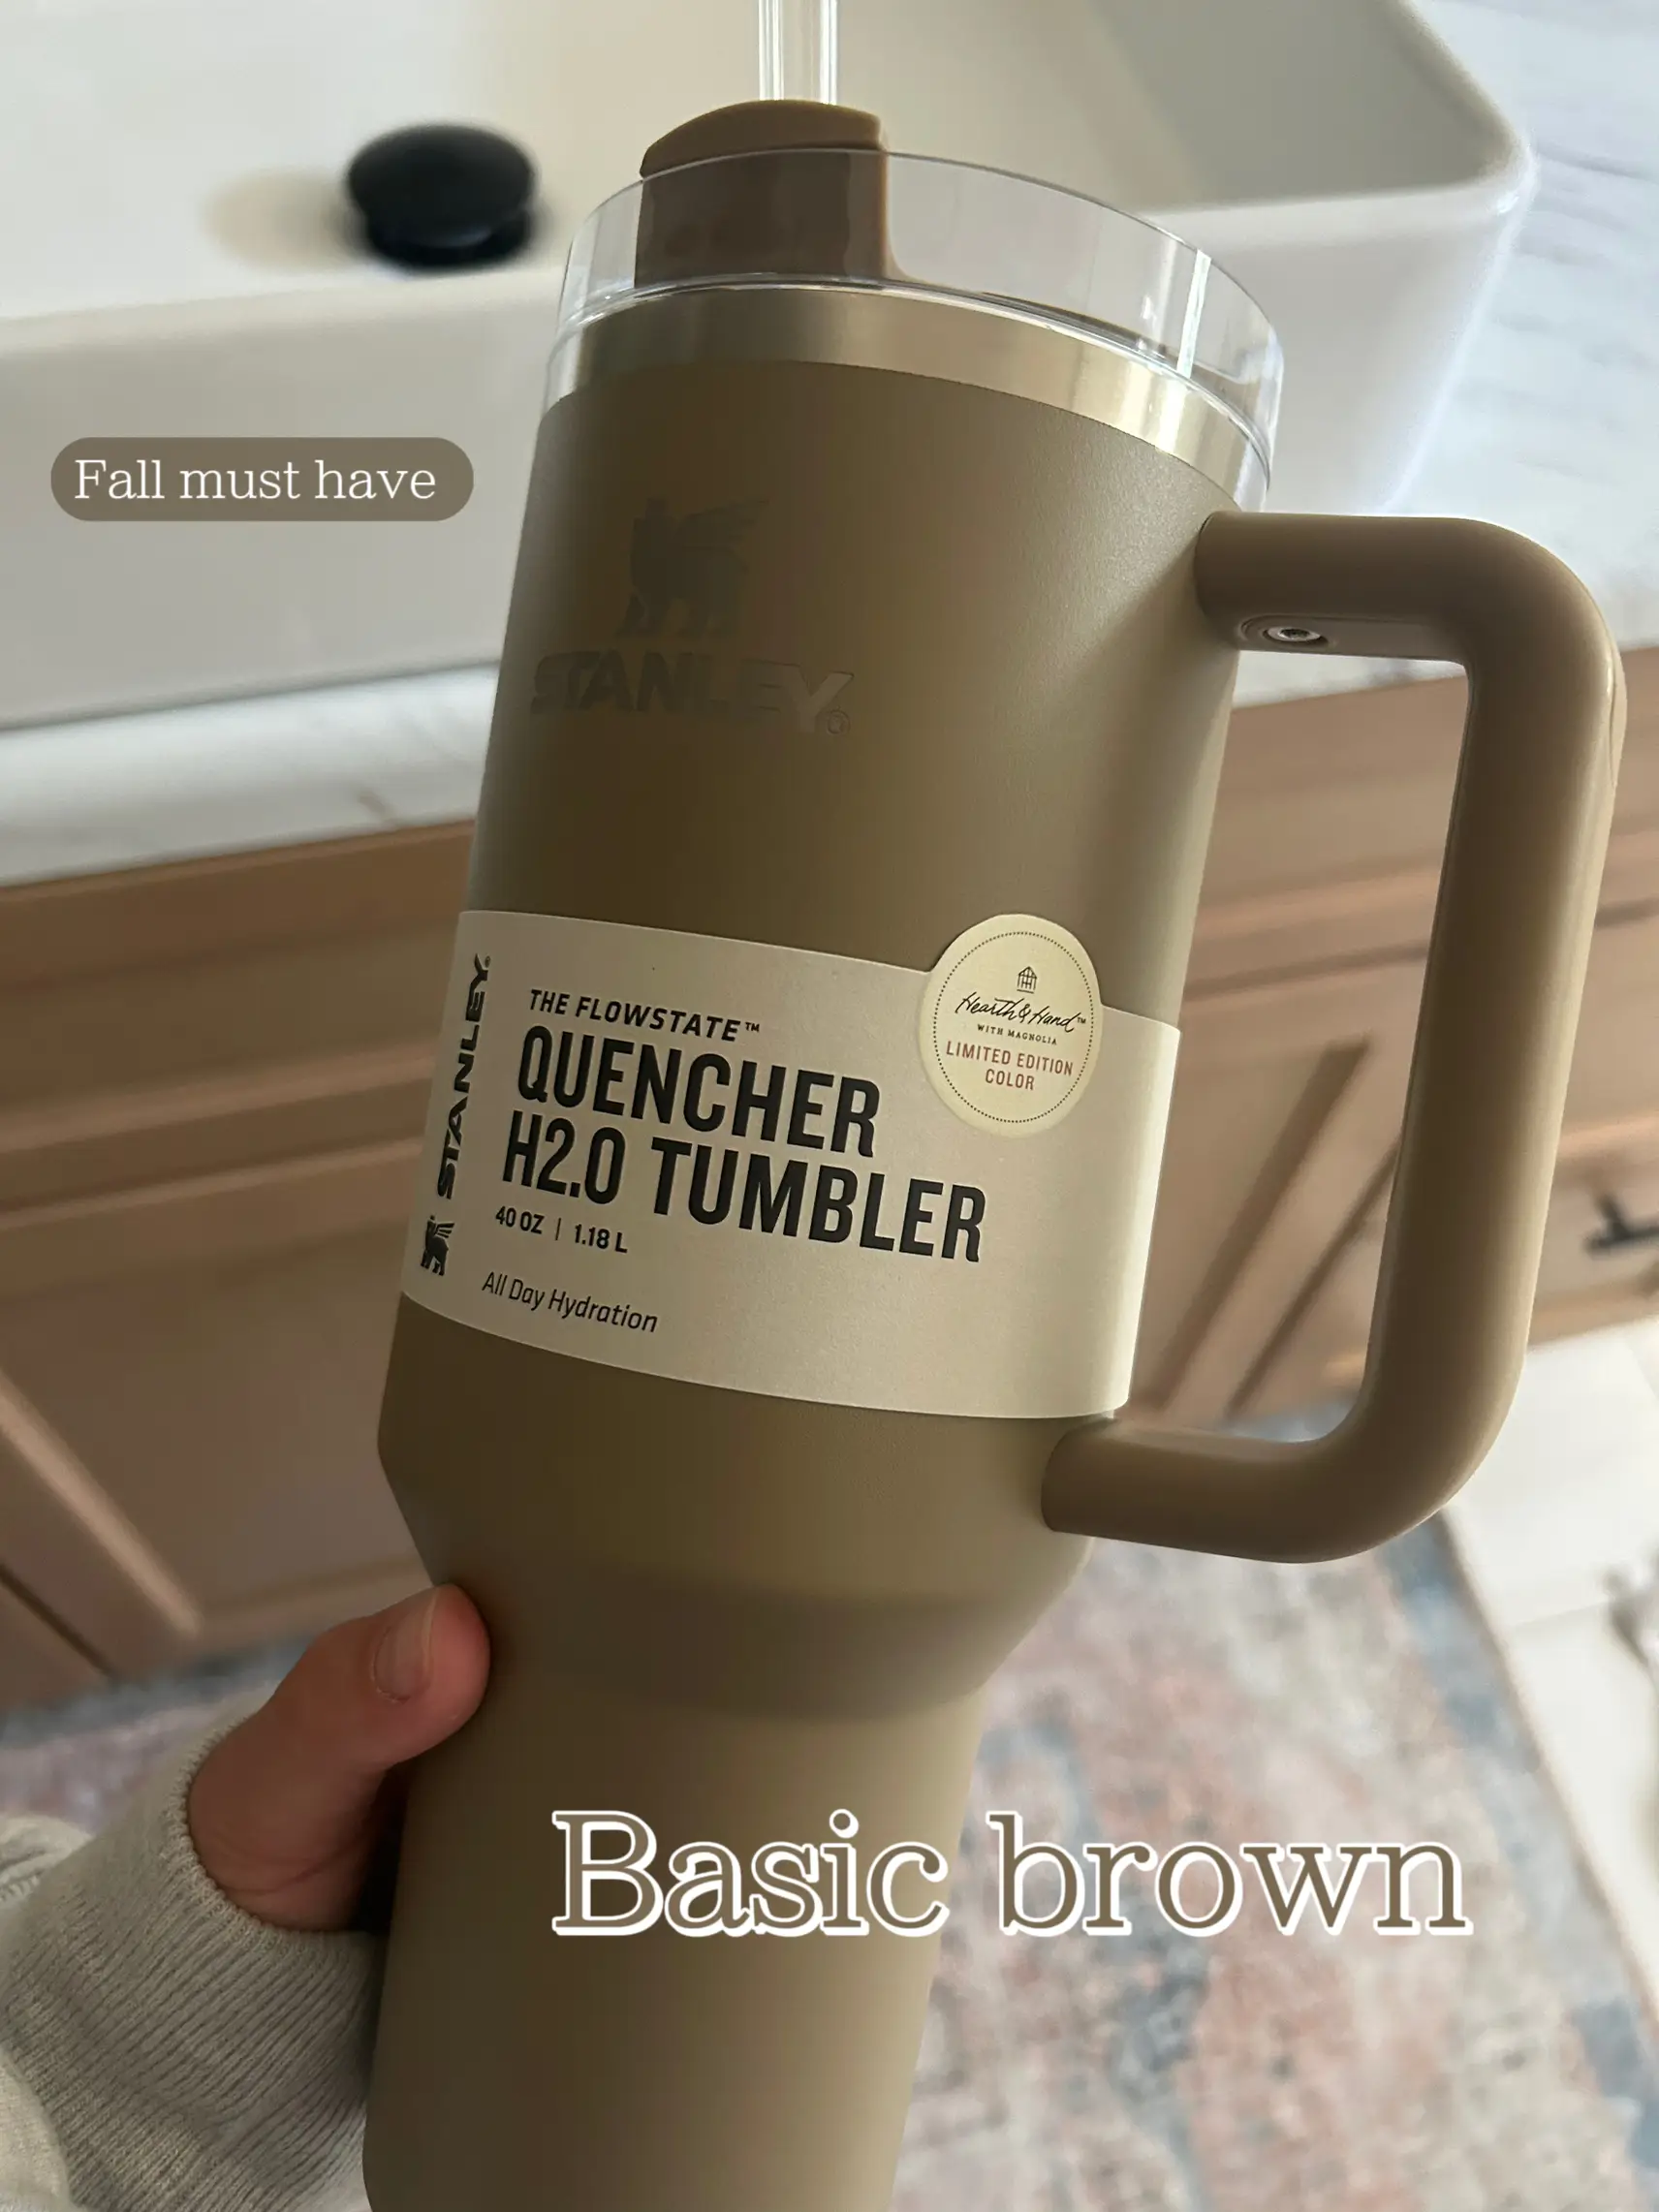 Basic brown, Gallery posted by Easler_loriann